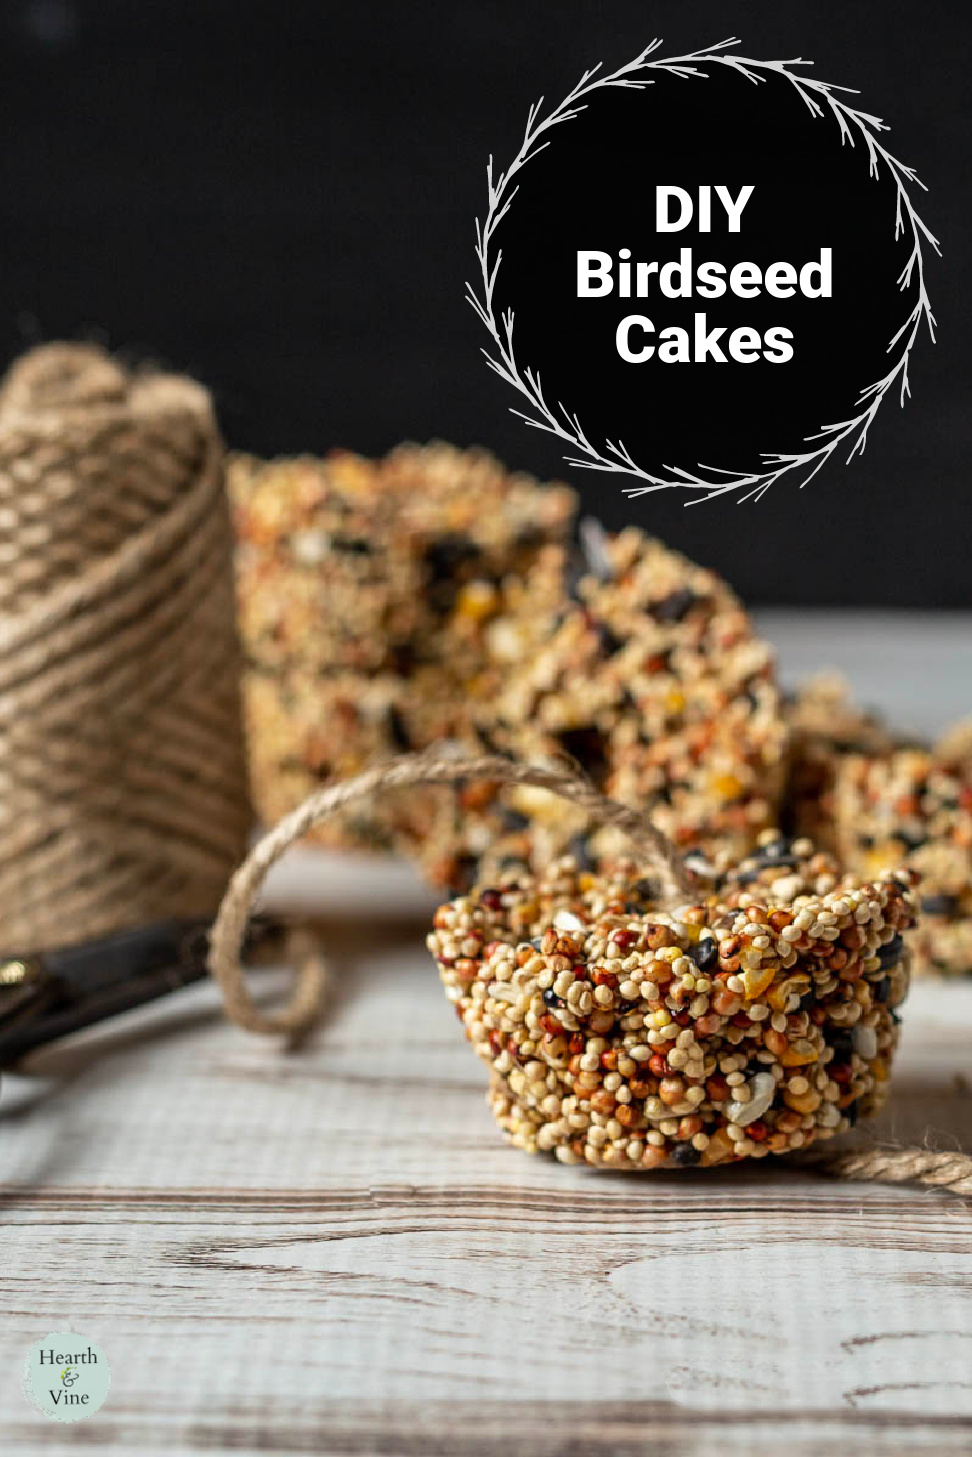 Birdseed cakes with twine through the middle.